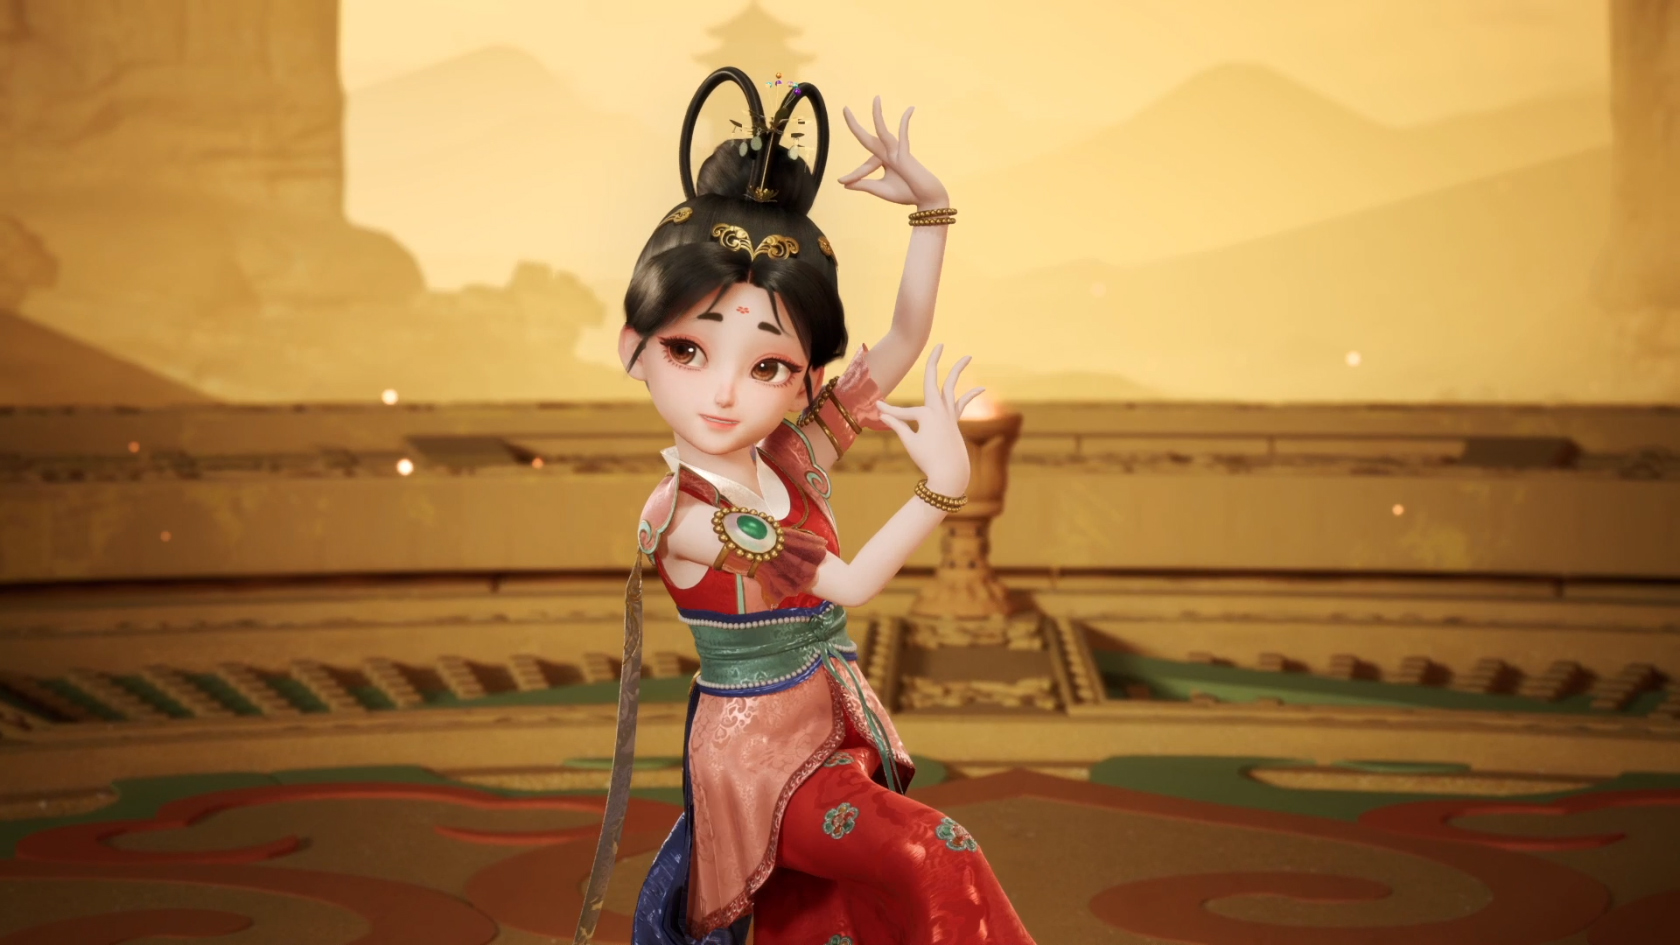 Jiayao, a virtual cartoon figure based on a half-woman, half-bird-like creature featured in Dunhuang murals, is the first digital cultural ambassador of Dunhuang. /Provided by Dunhuang Academy